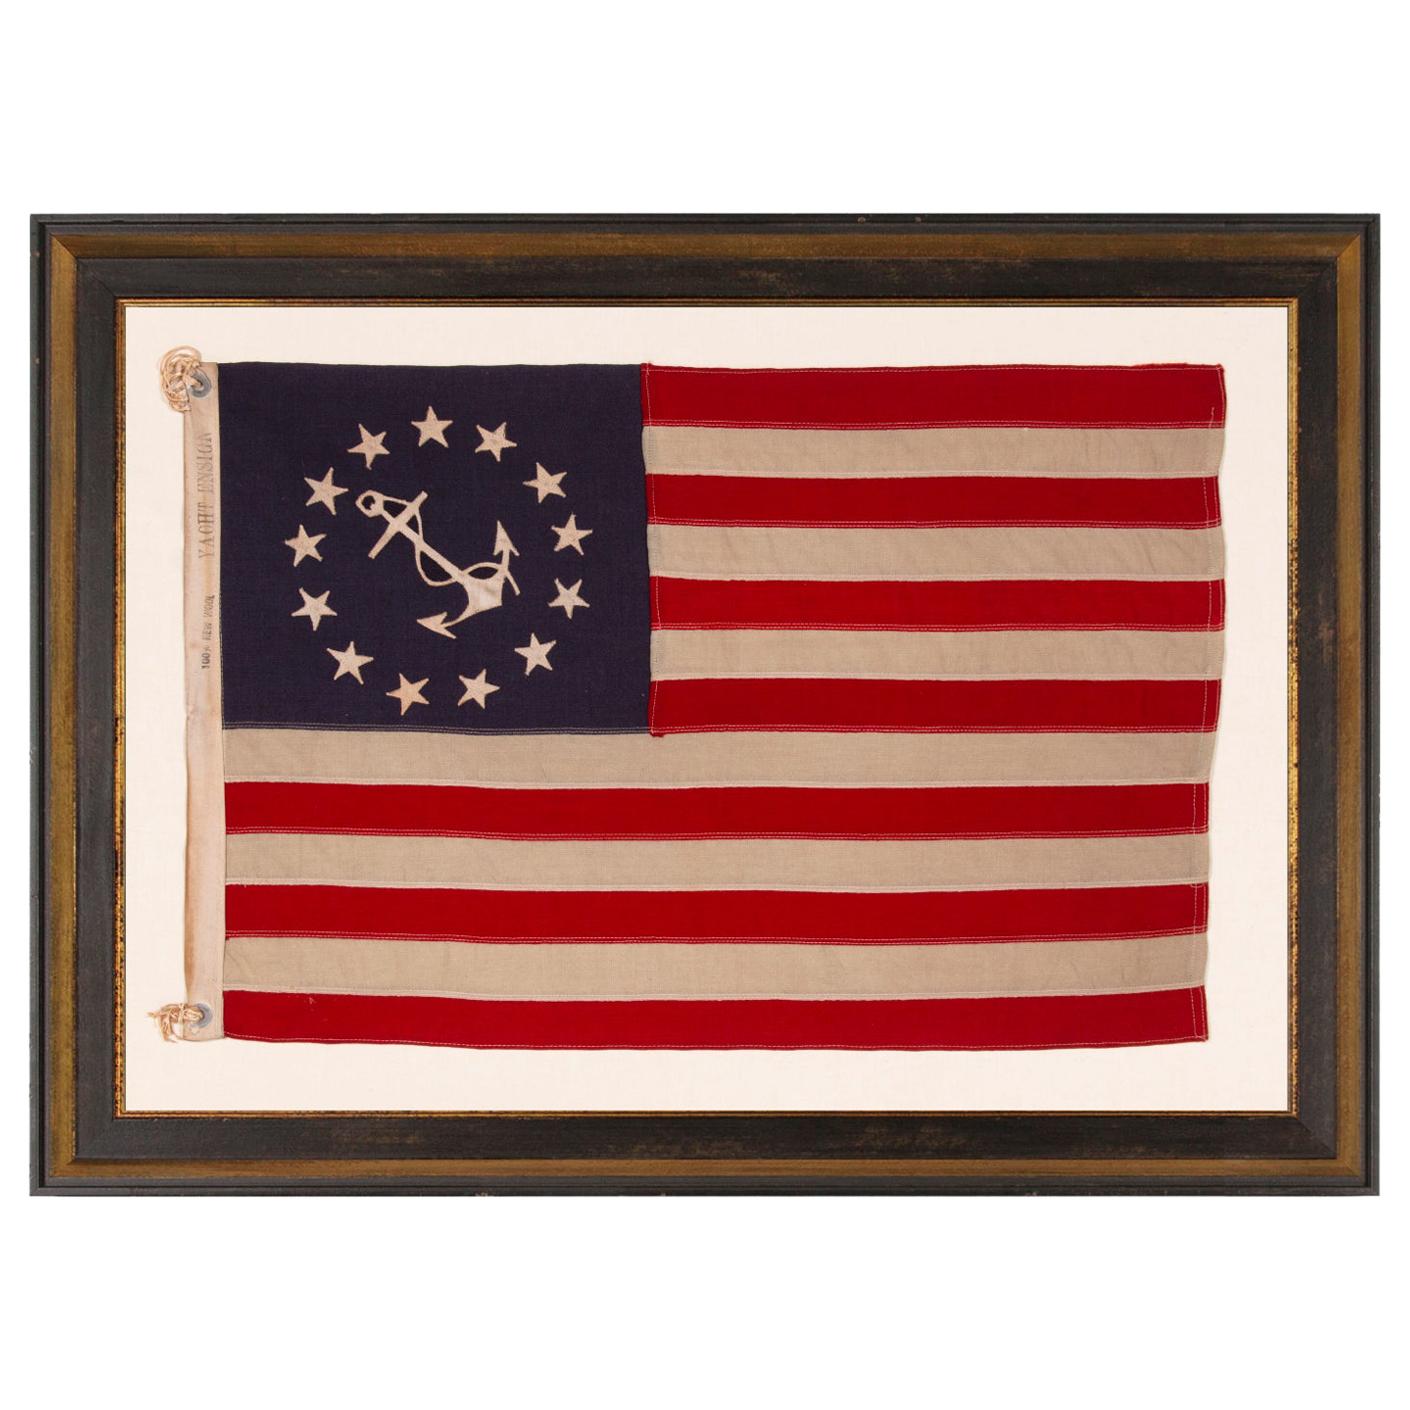 13 Star Antique American Private Yacht Flag